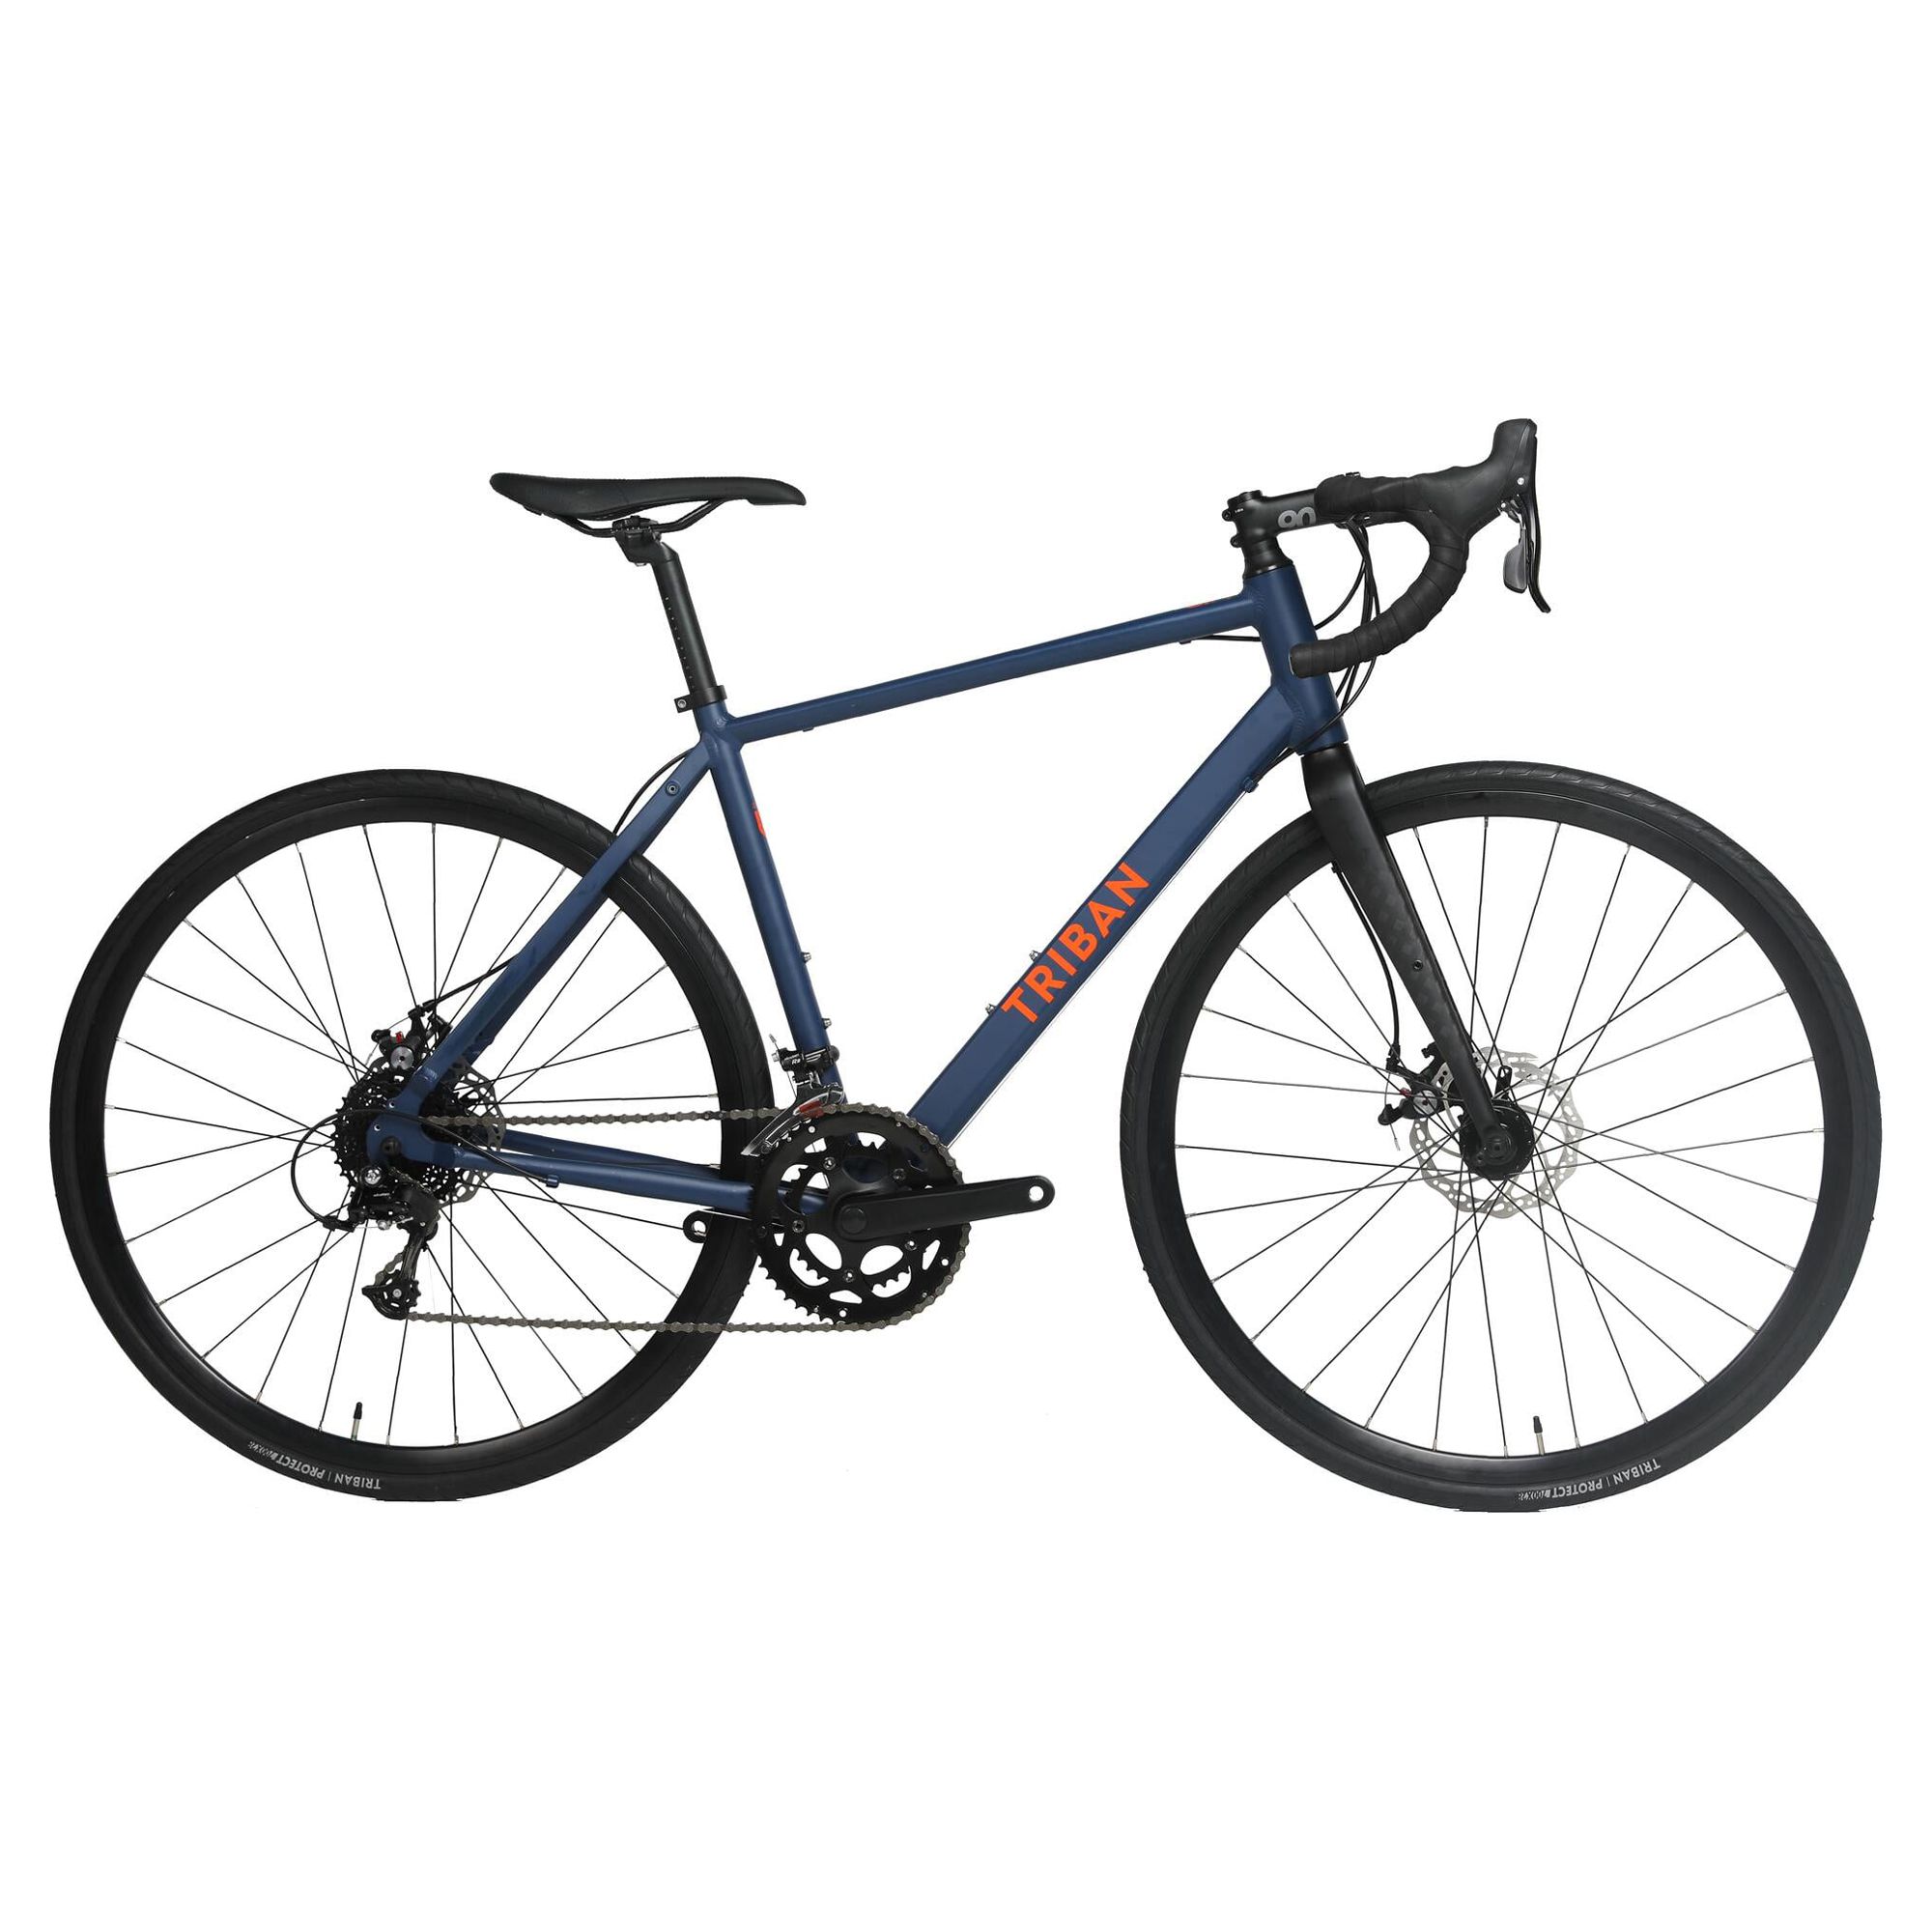 Decathlon Triban RC120, Aluminum Road Bike with Disc Brakes, 700c, Large, Blue - image 1 of 10